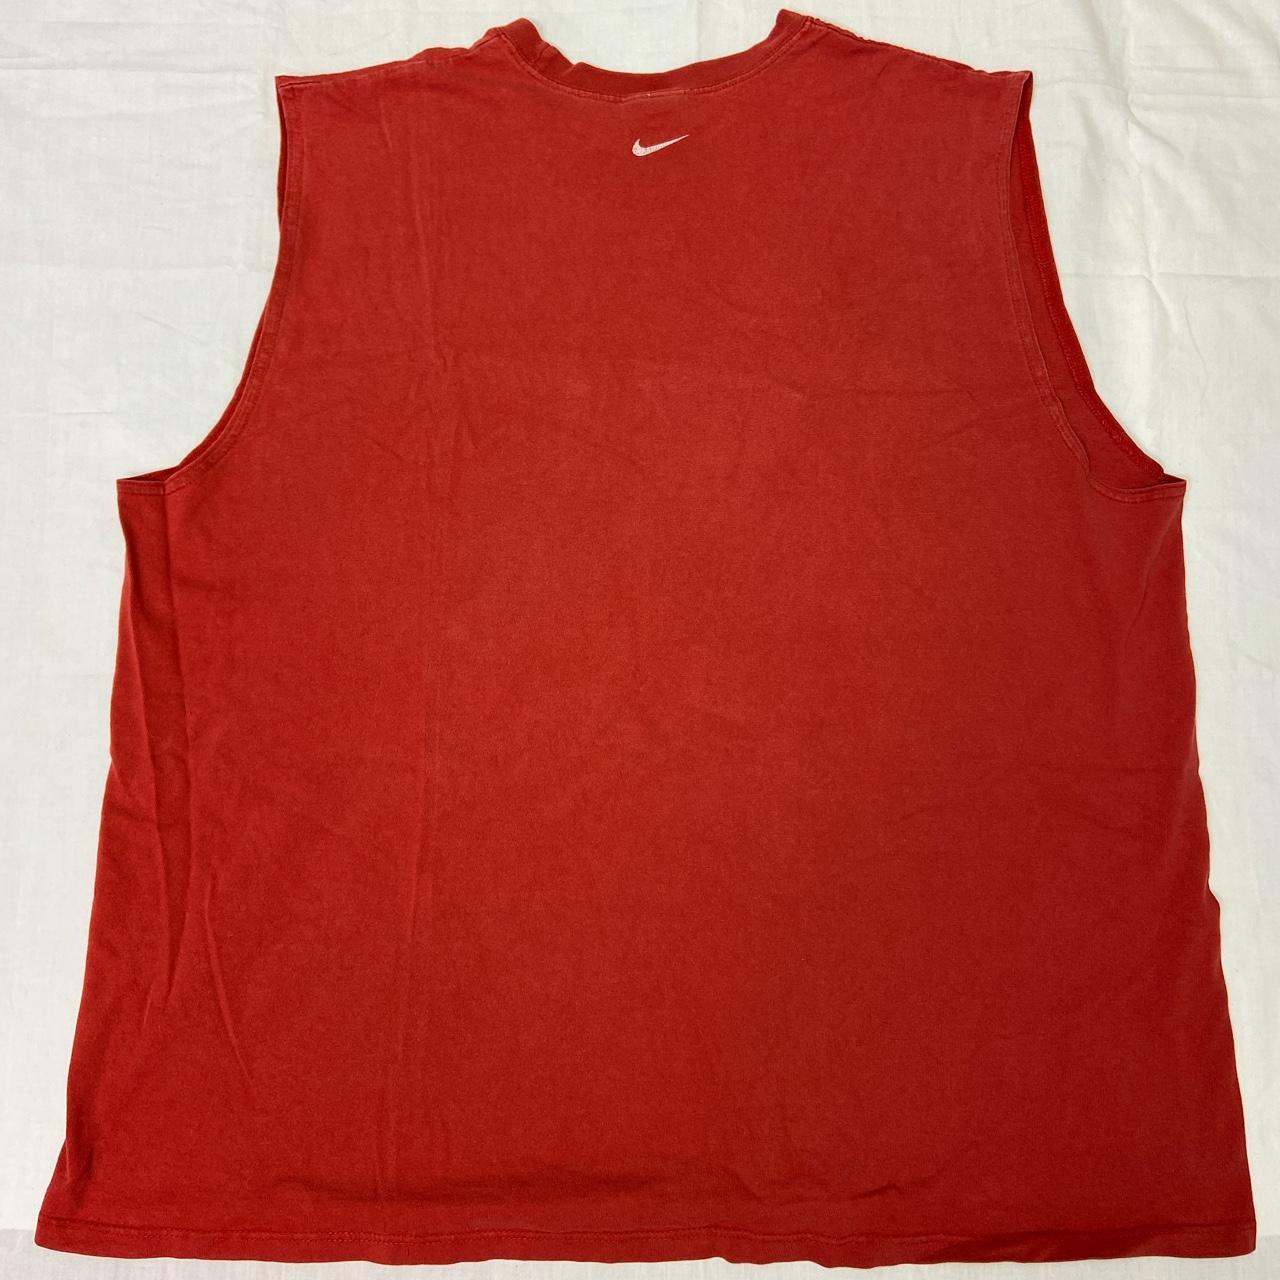 Nike Men's Red and Navy Vest (4)